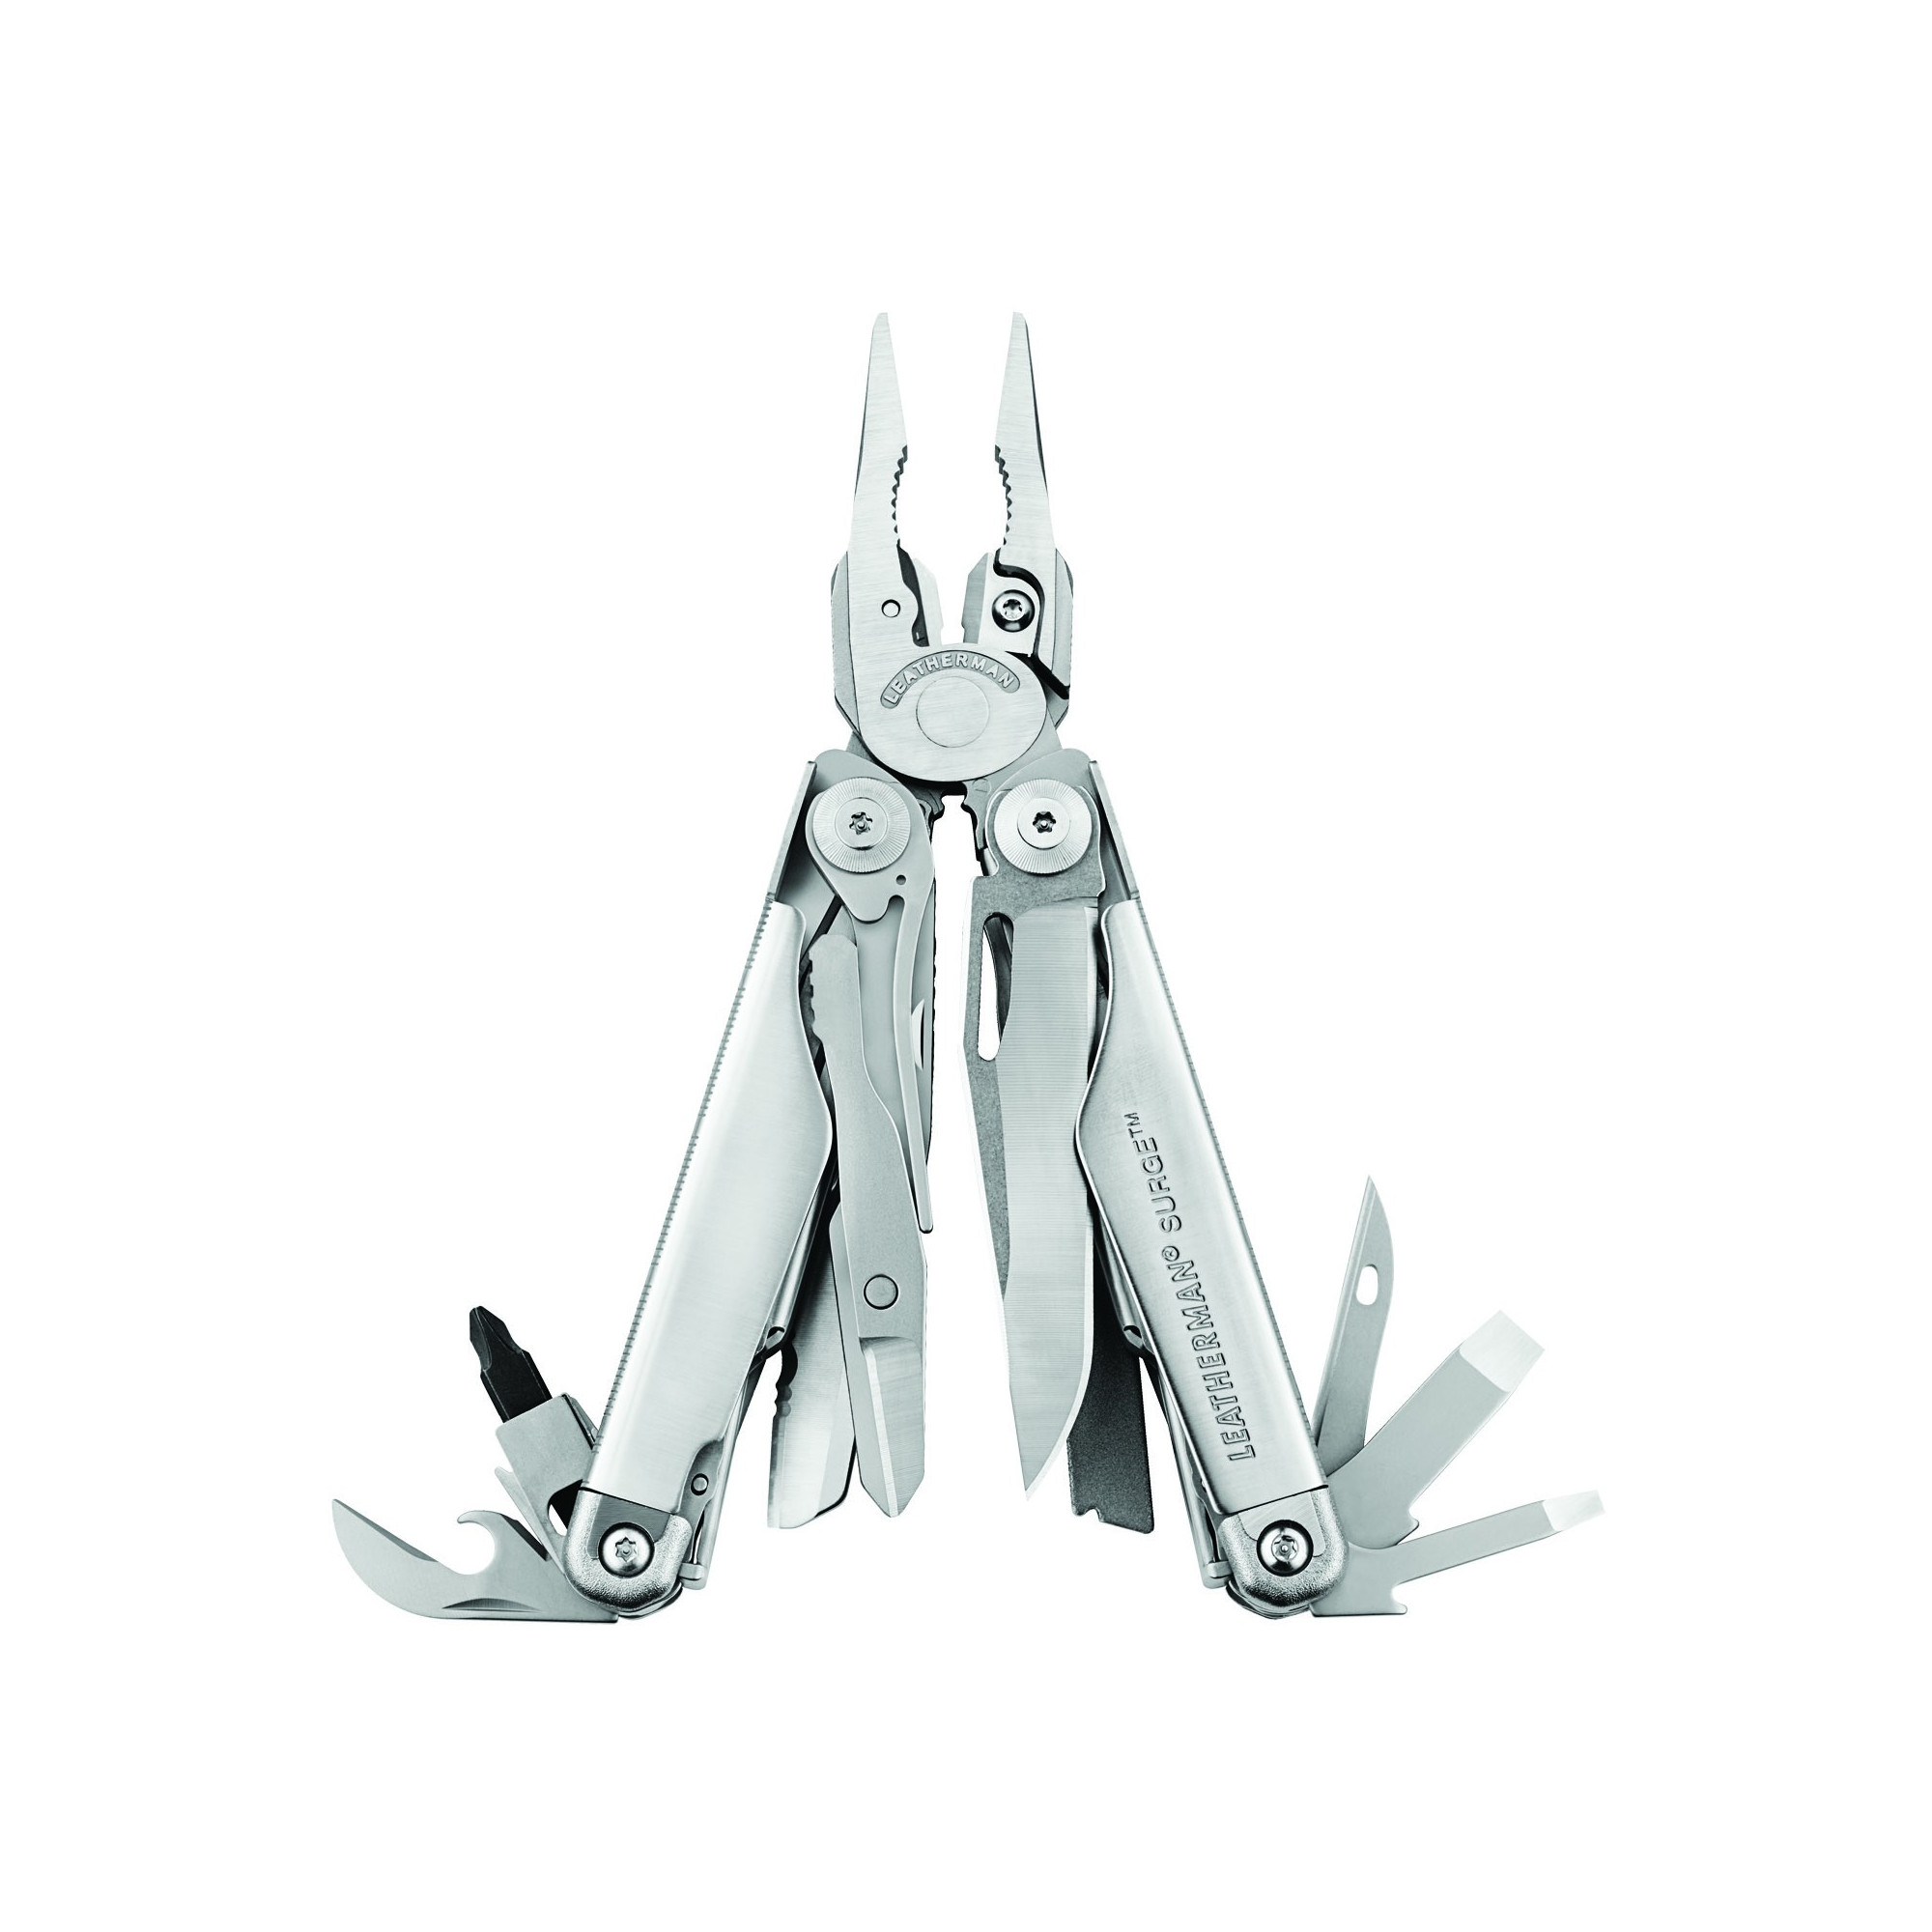 Pince multi-fonctions New Surge Leatherman